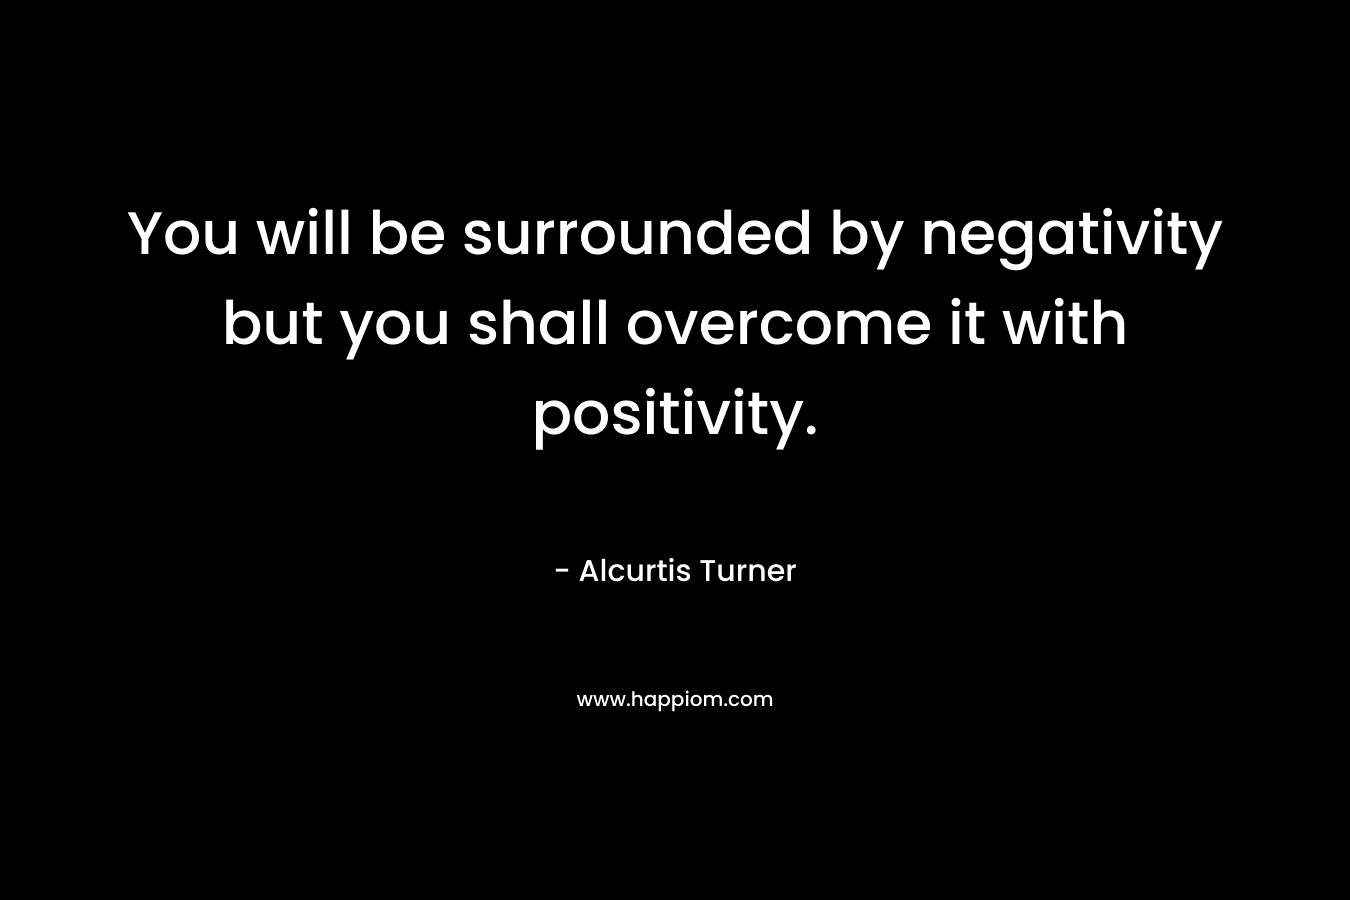 You will be surrounded by negativity but you shall overcome it with positivity. – Alcurtis Turner